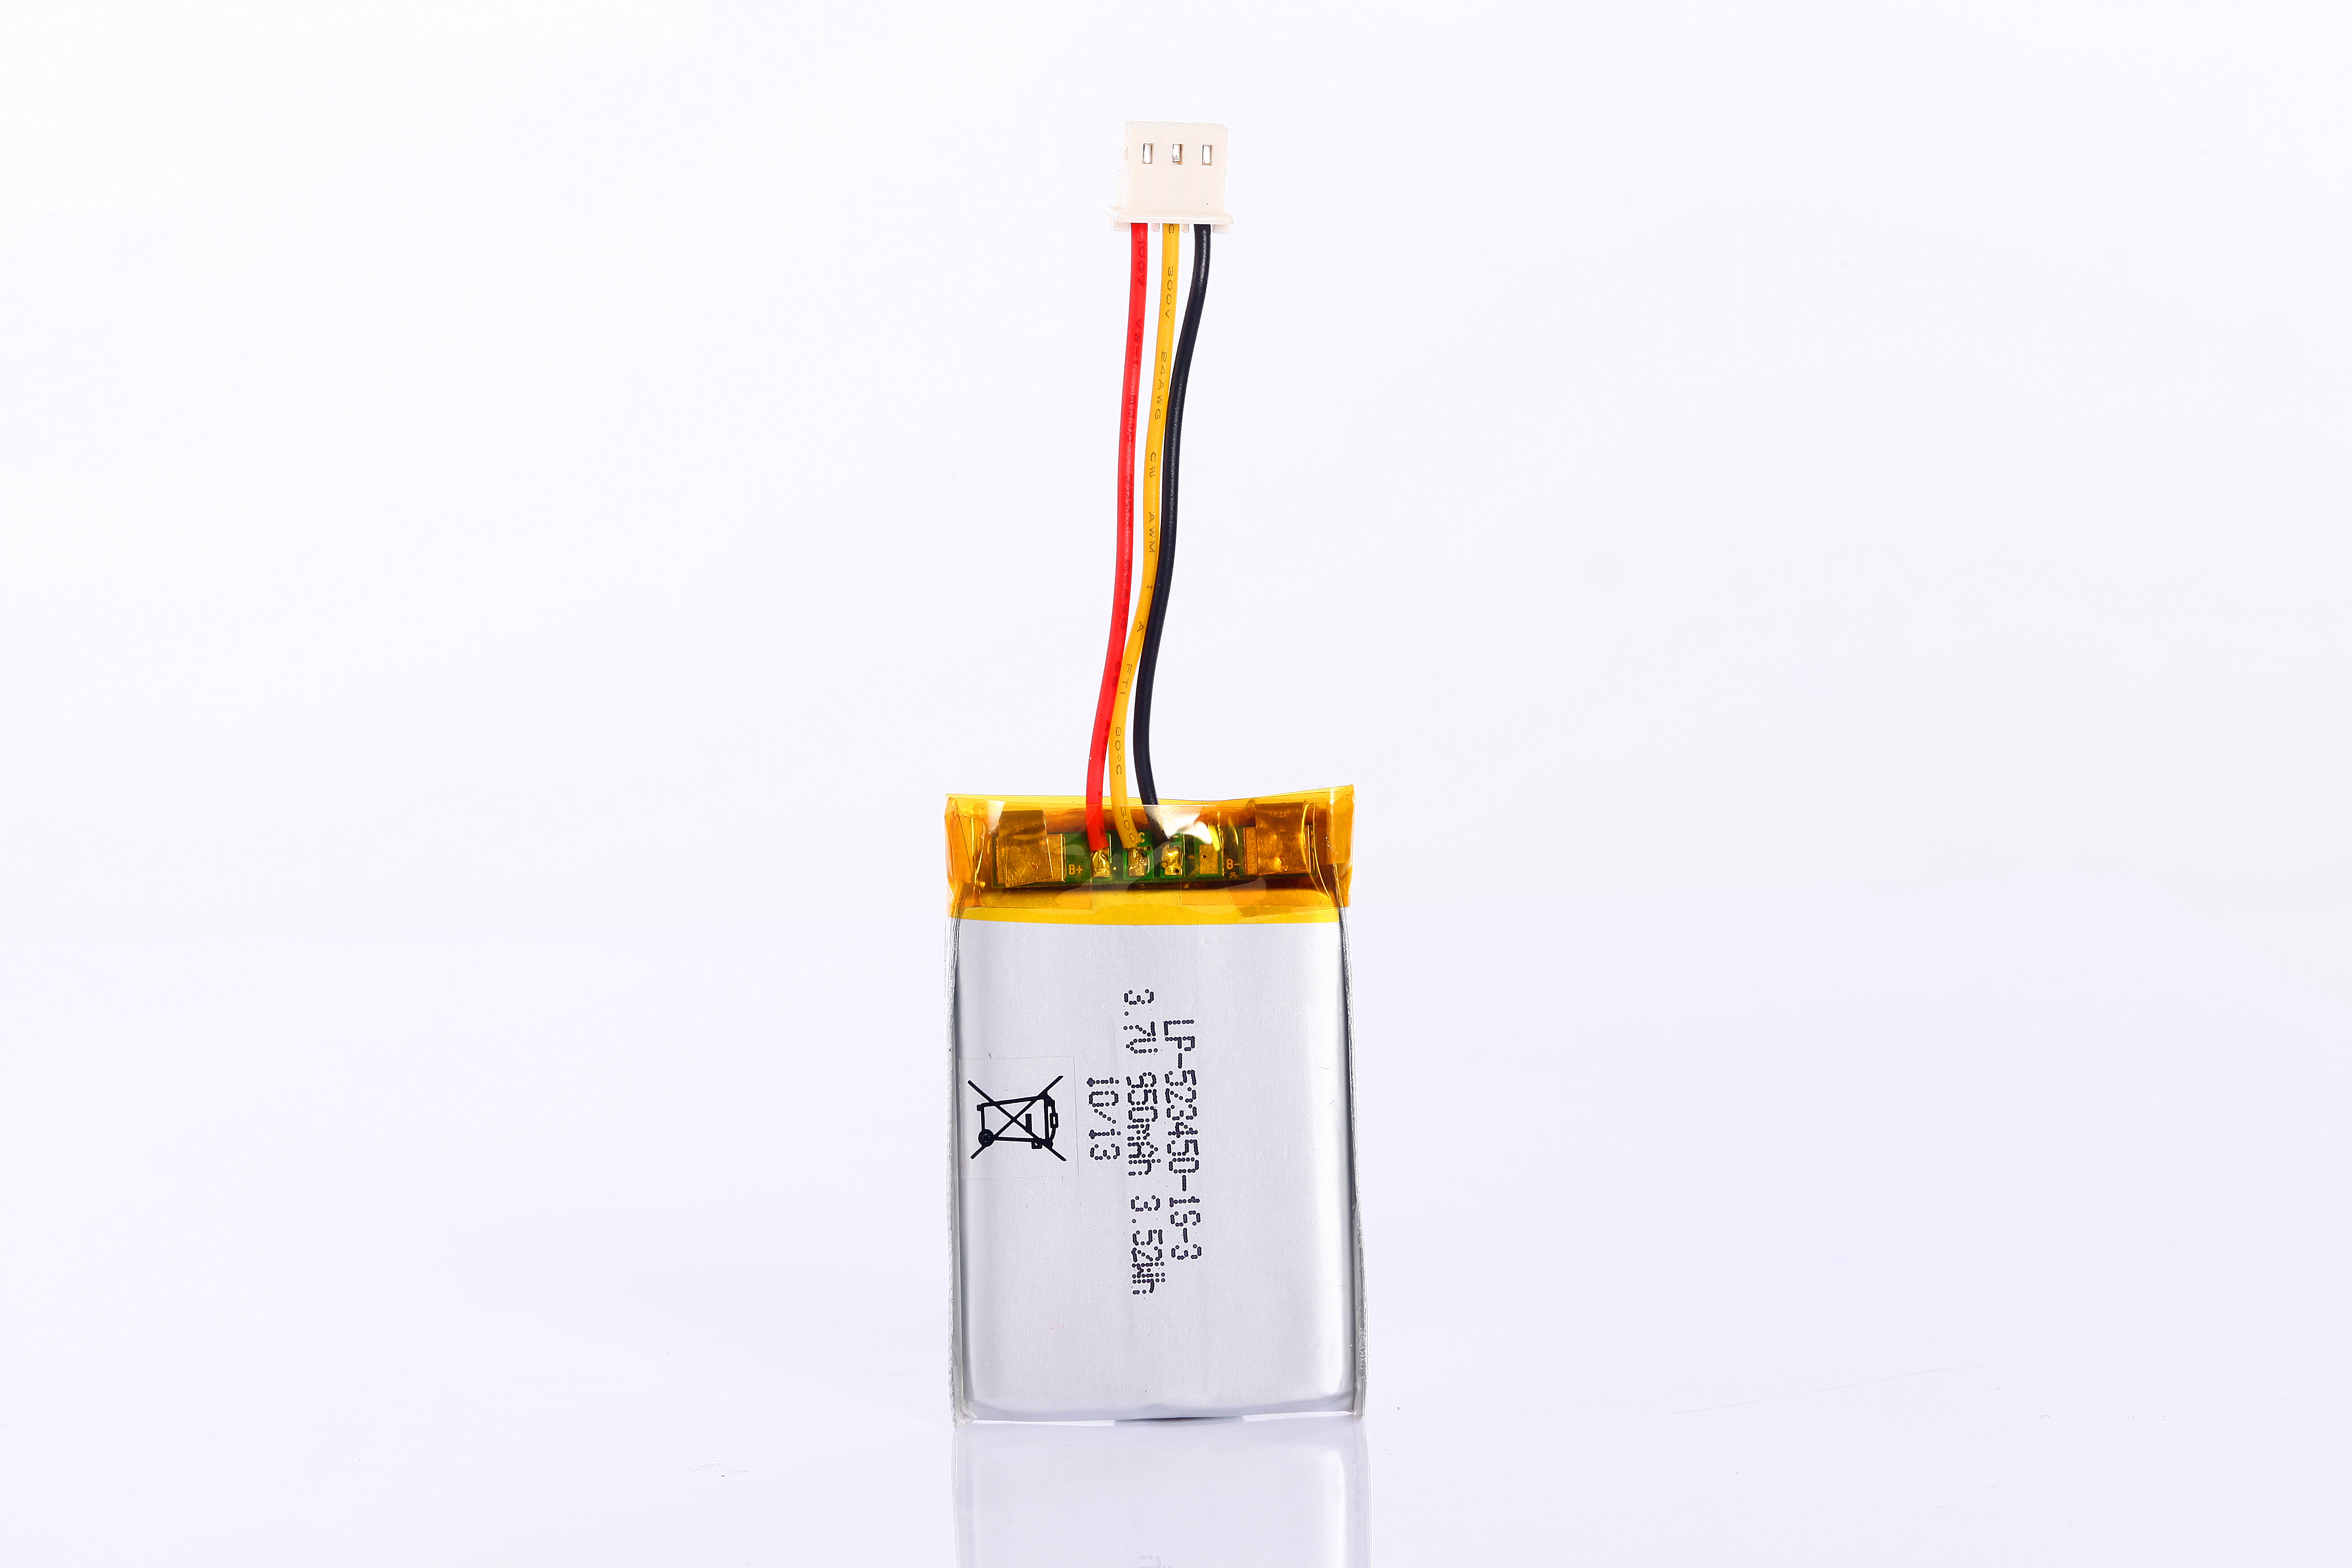 BAKTH-523450P-1S-3 Lithium Polymer Rechargeable Battery 3.7V 950mAh 